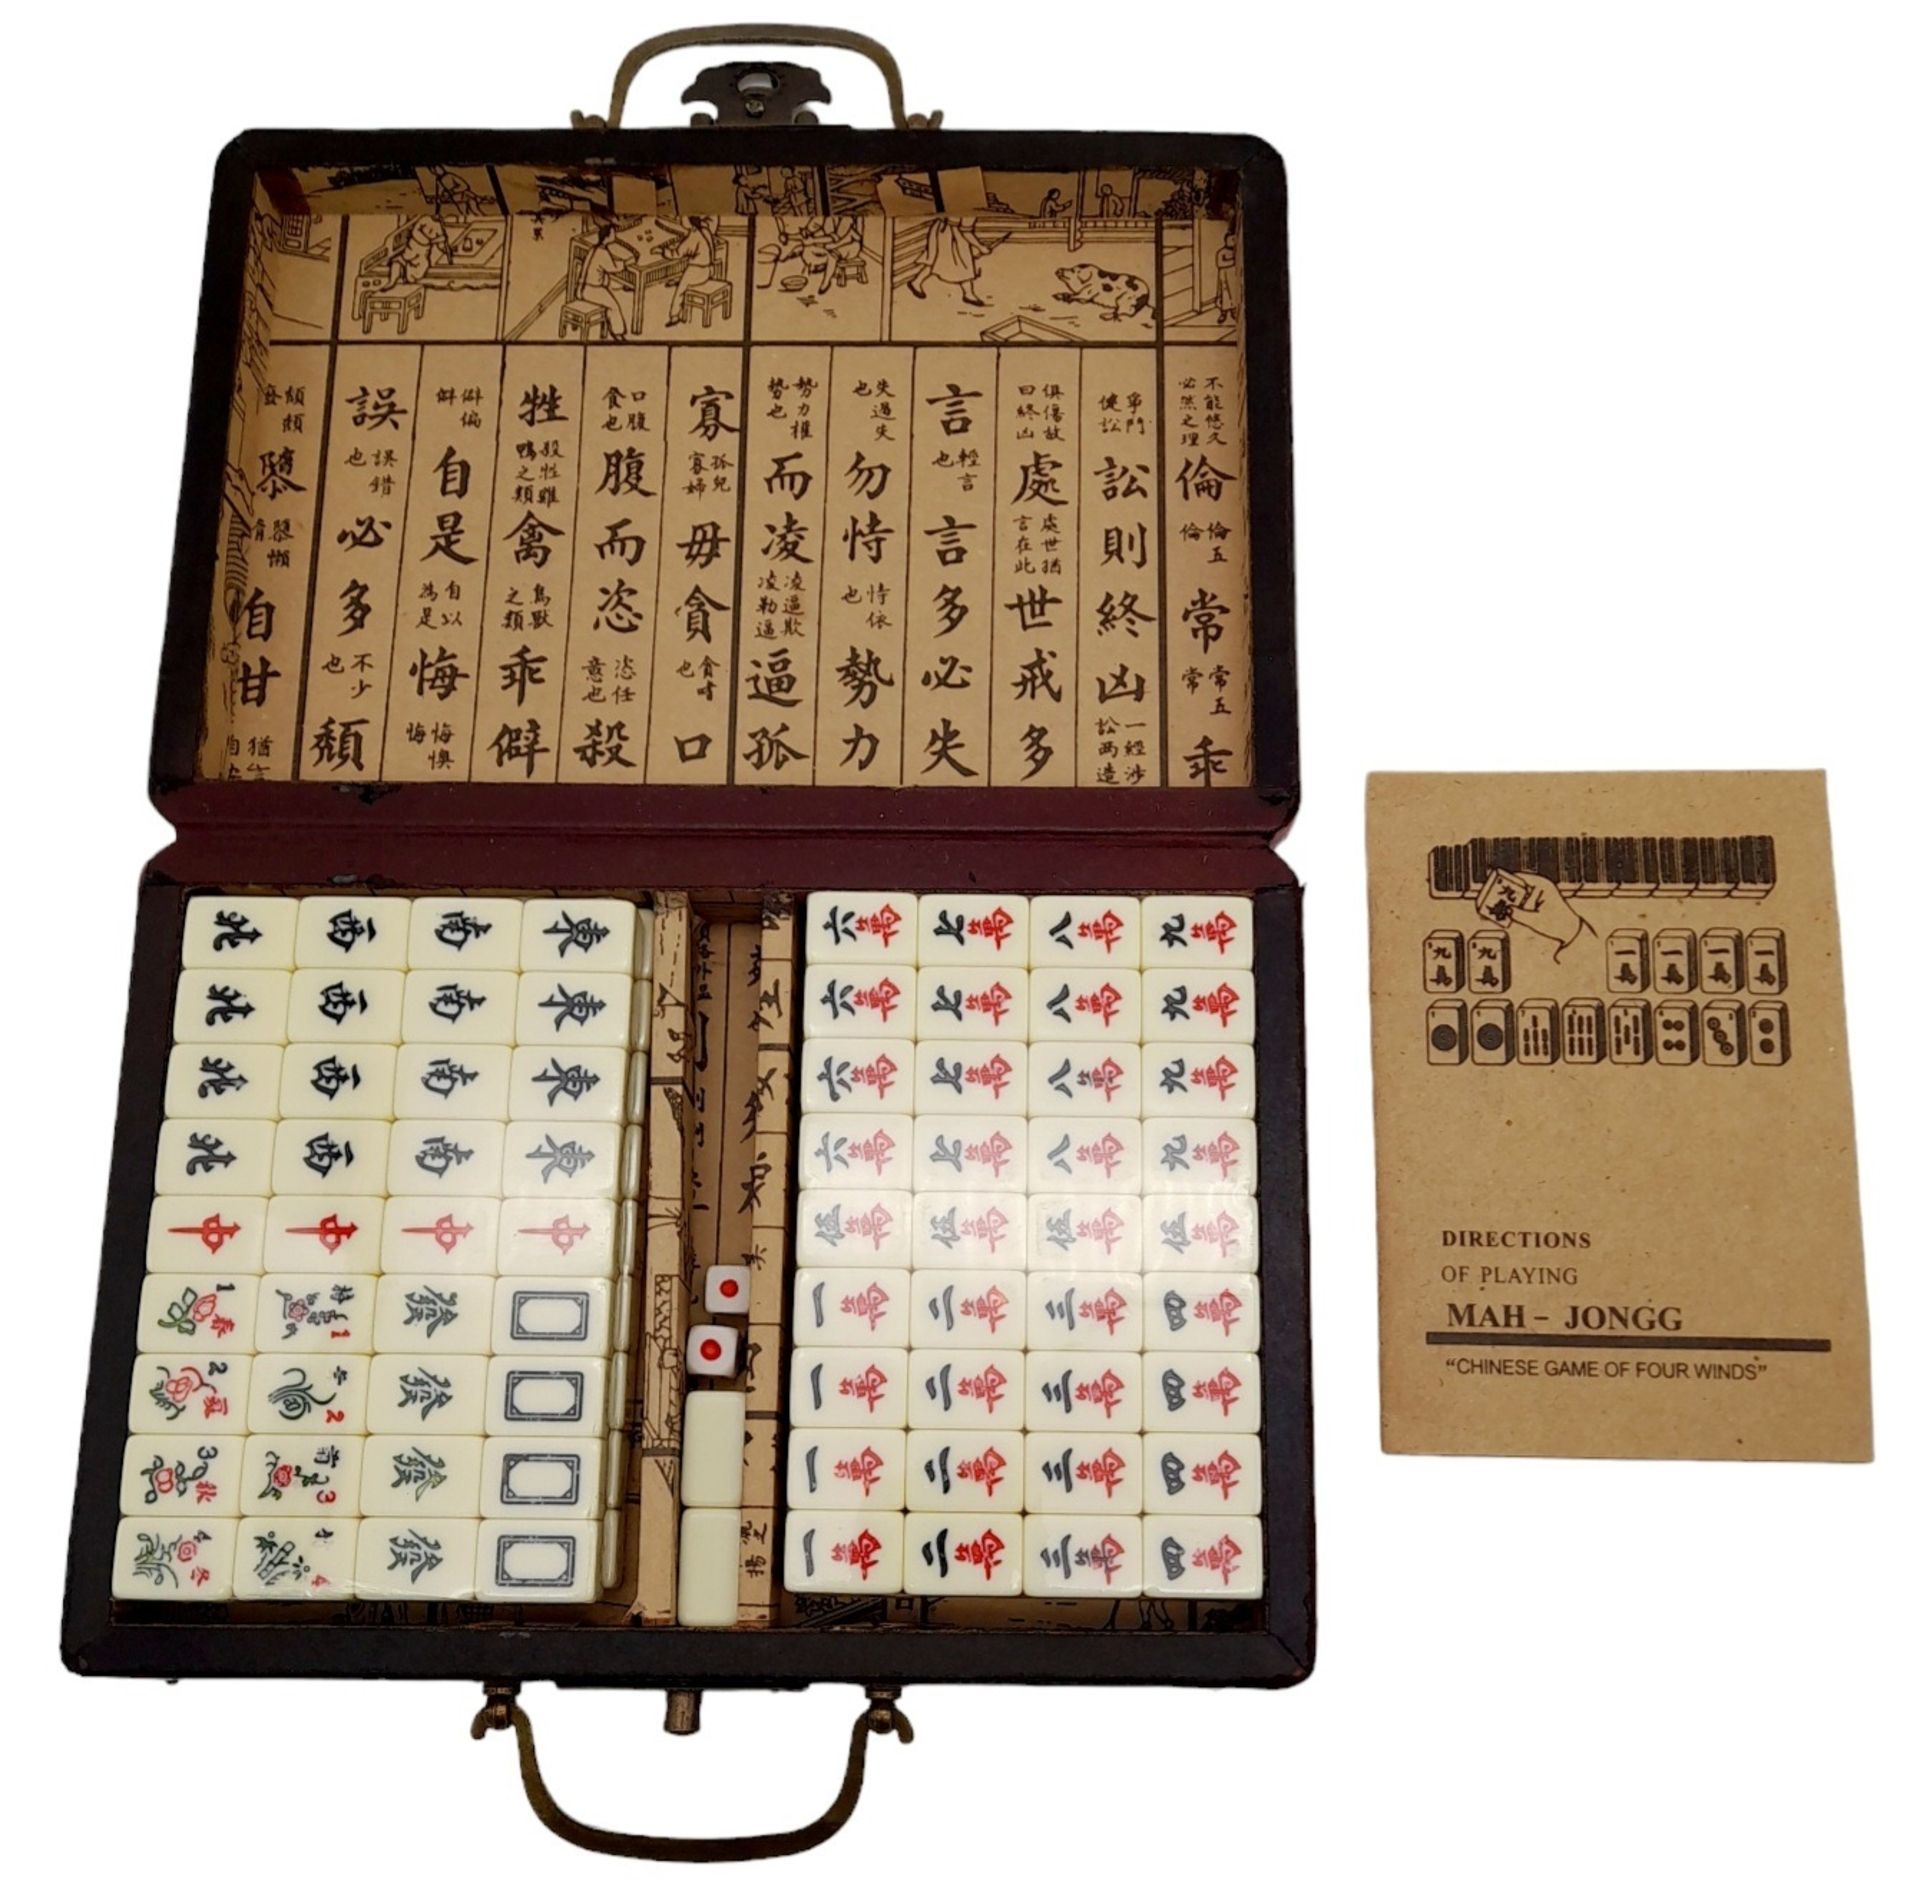 A Mah Jongg Chinese Dice Game in a Small Decorative Travelling Case. In excellent condition. - Bild 5 aus 7